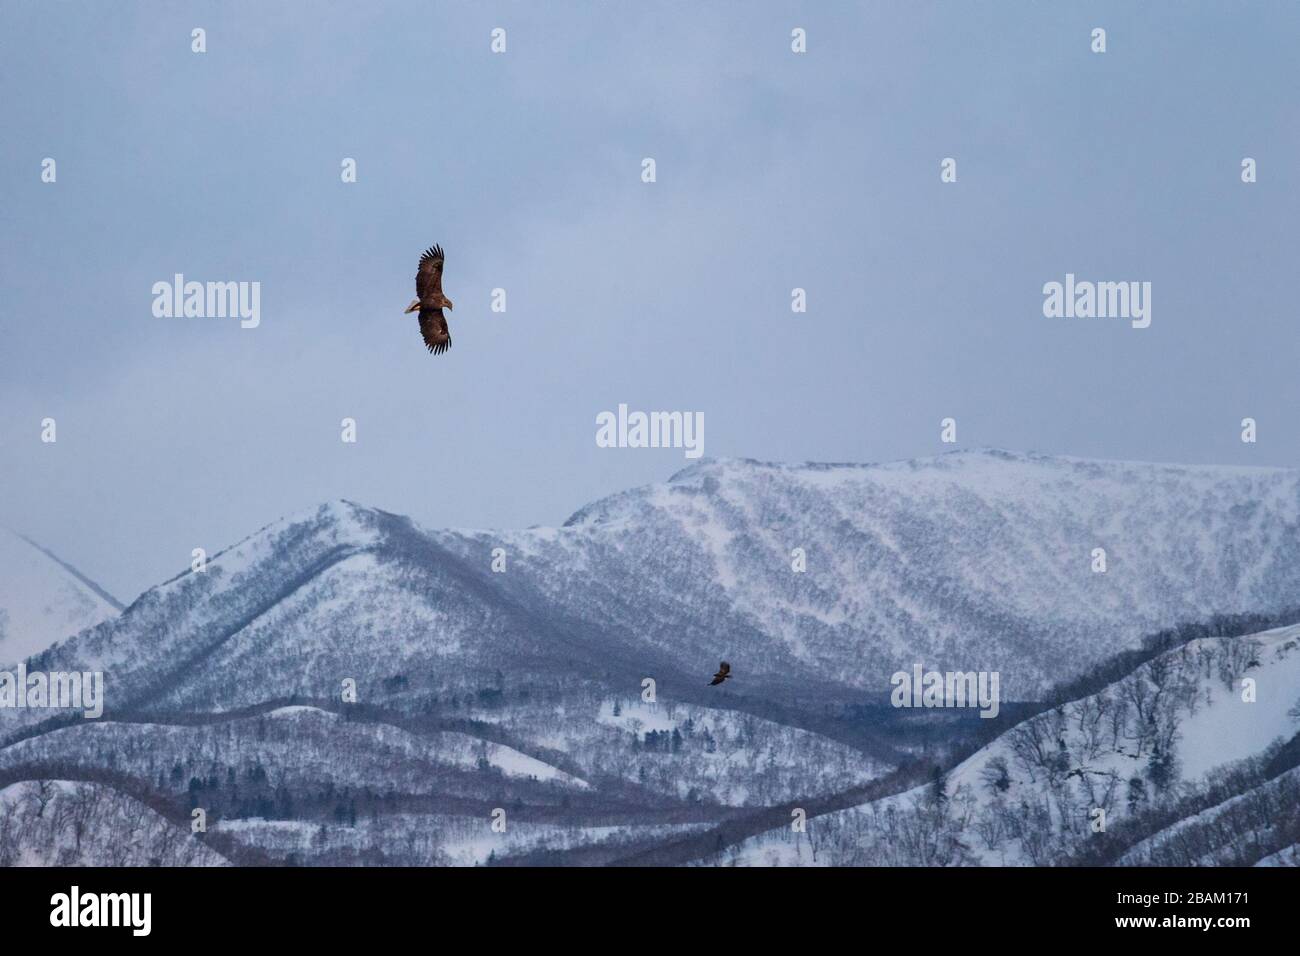 White-tailed eagle flying in front of winter mountains scenery in Hokkaido, Bird silhouette. Beautiful nature scenery in winter. Mountain covered by s Stock Photo